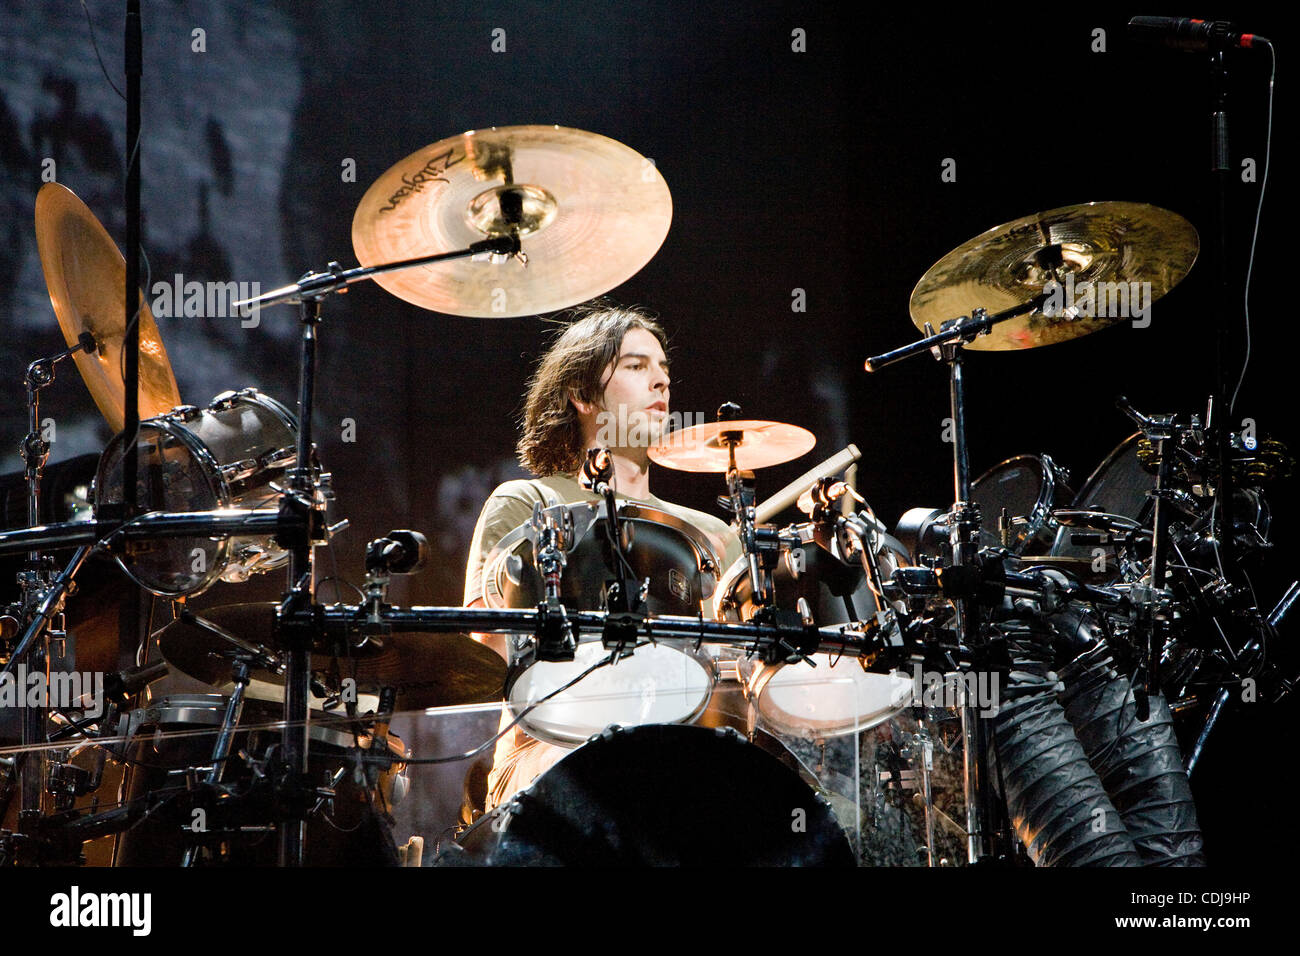 Feb 20, 2011 - San Diego CA USA - Multi-platinum, Grammy Award winning artist Linkin Park played their second show after missing several dates due to the illness of co-lead vocalist Chester Bennington.    Drummer Rob Bourdon performs.  (Credit Image: ©2011 Daniel Knighton/ZUMA Press) Stock Photo